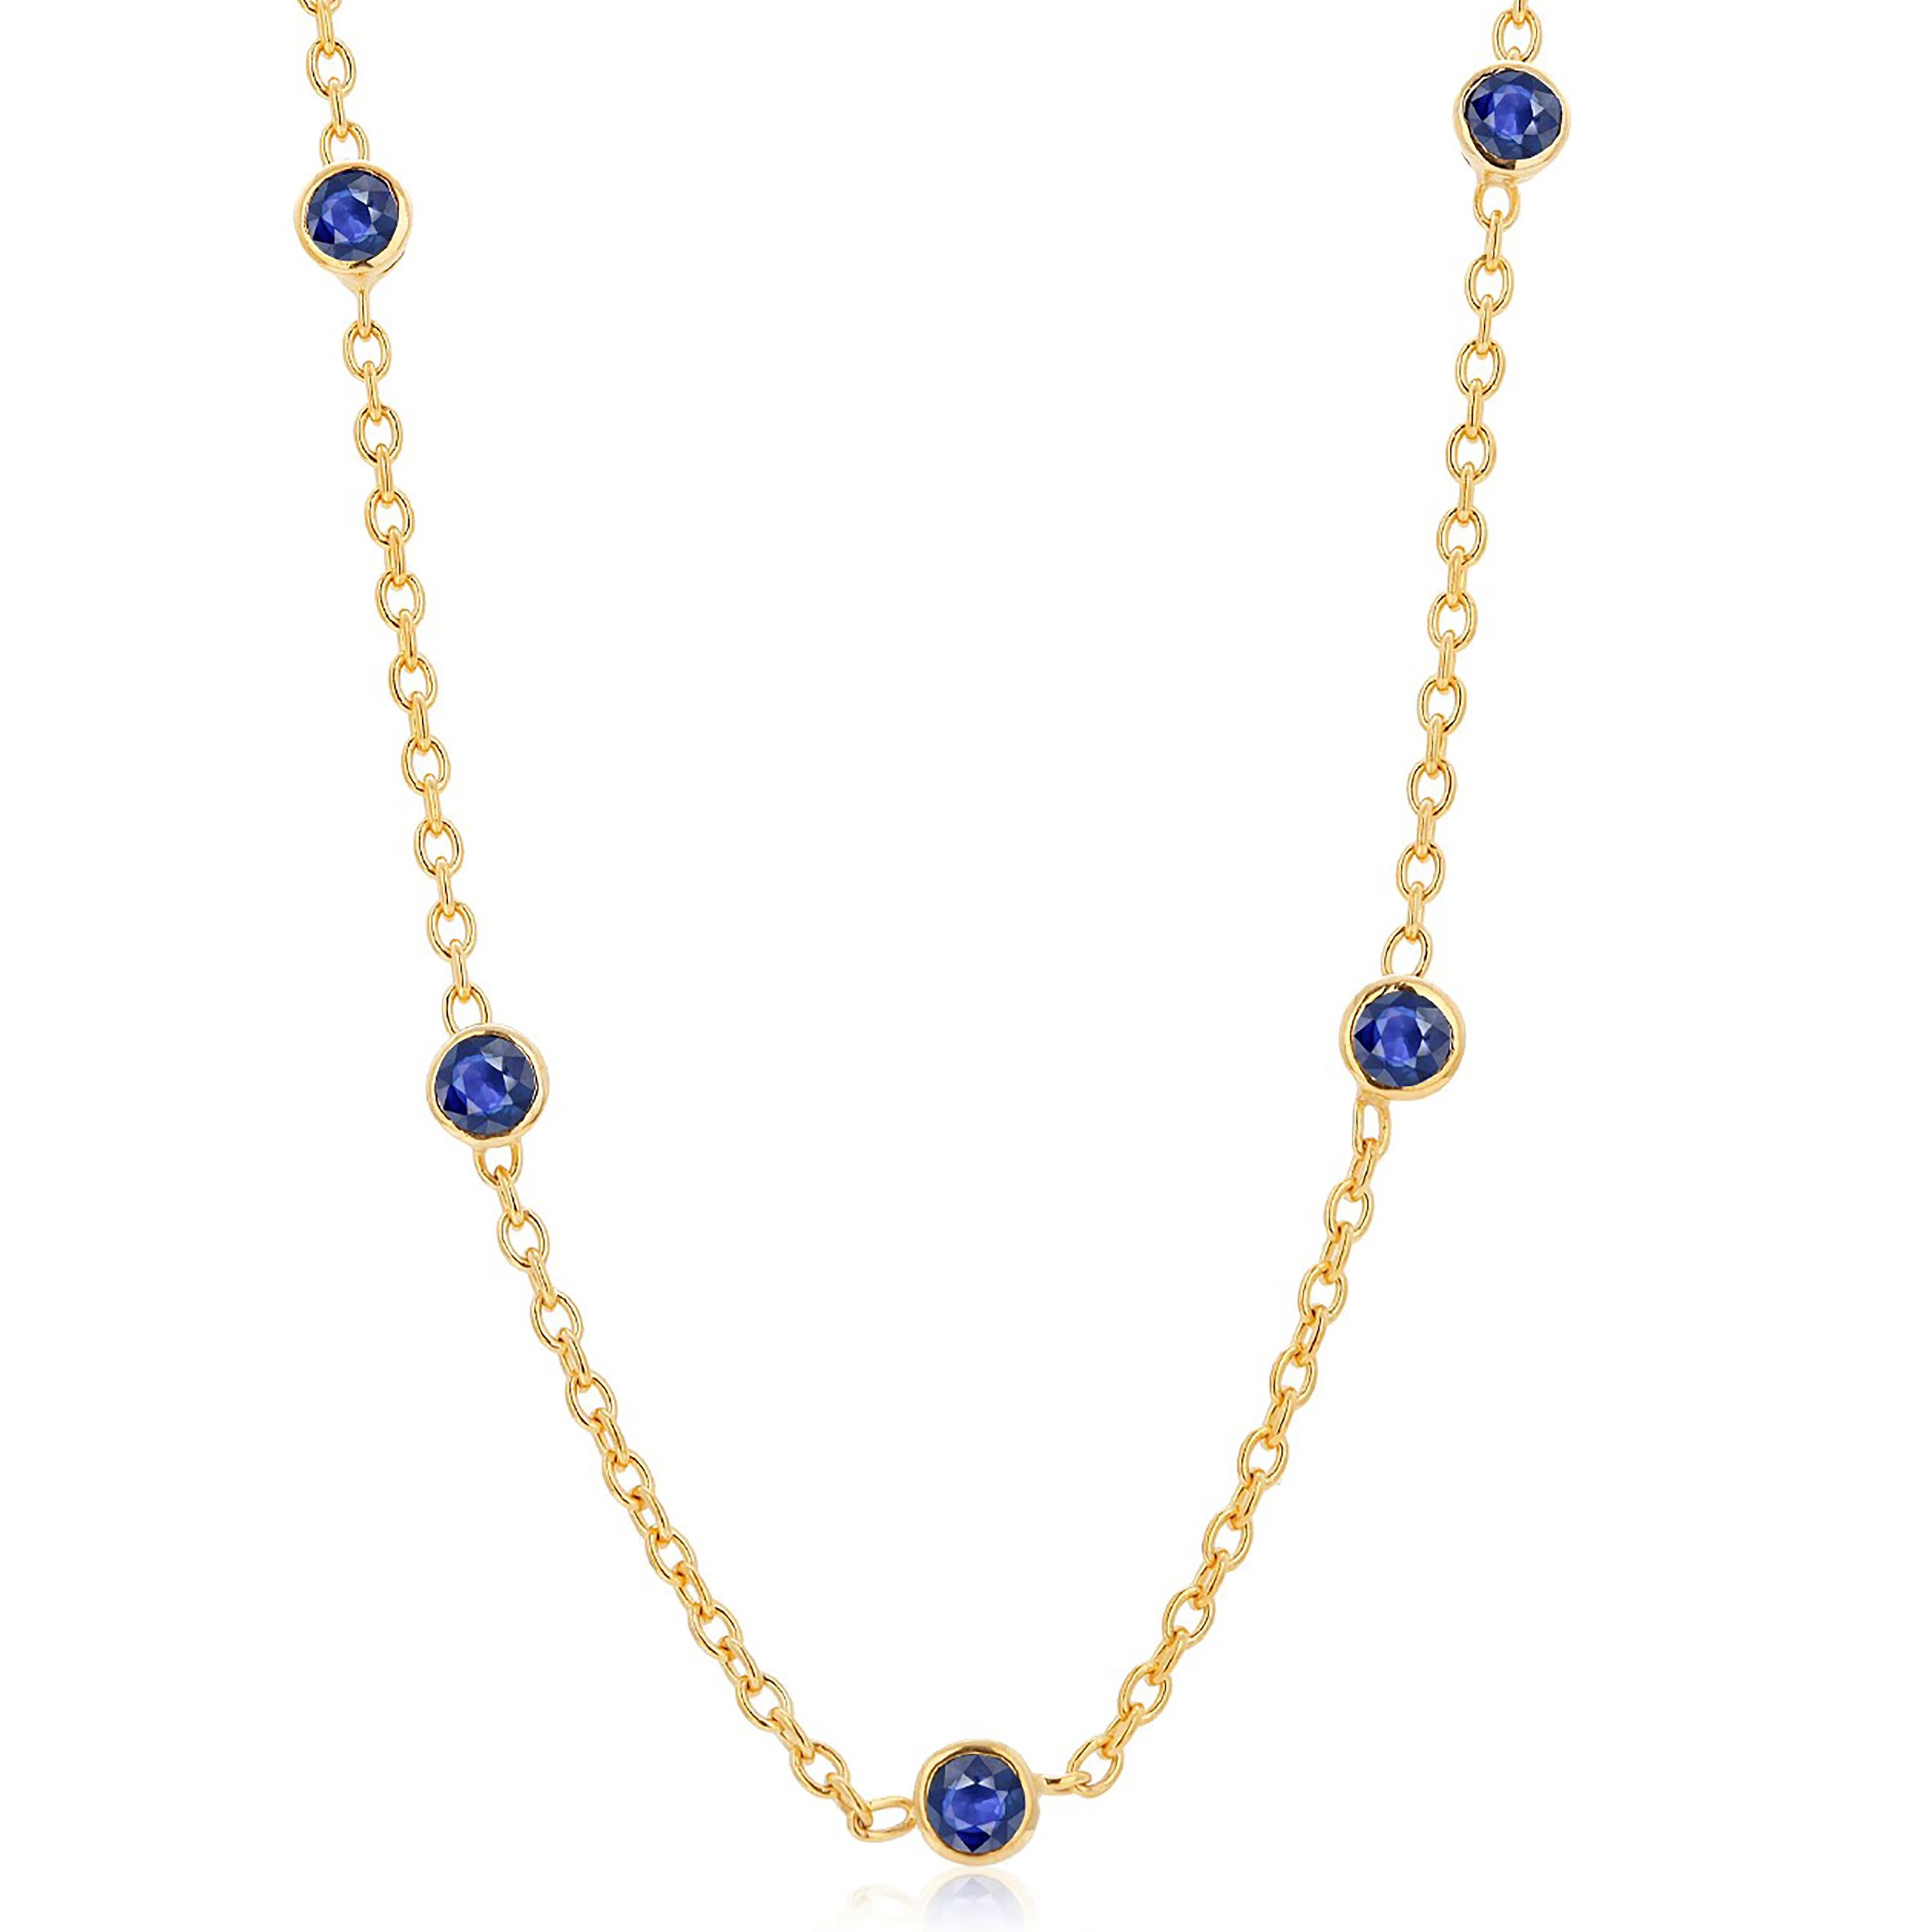 Modern Five Natural Blue Sapphire Bezel Necklace Sterling Silver Yellow Gold-Plated